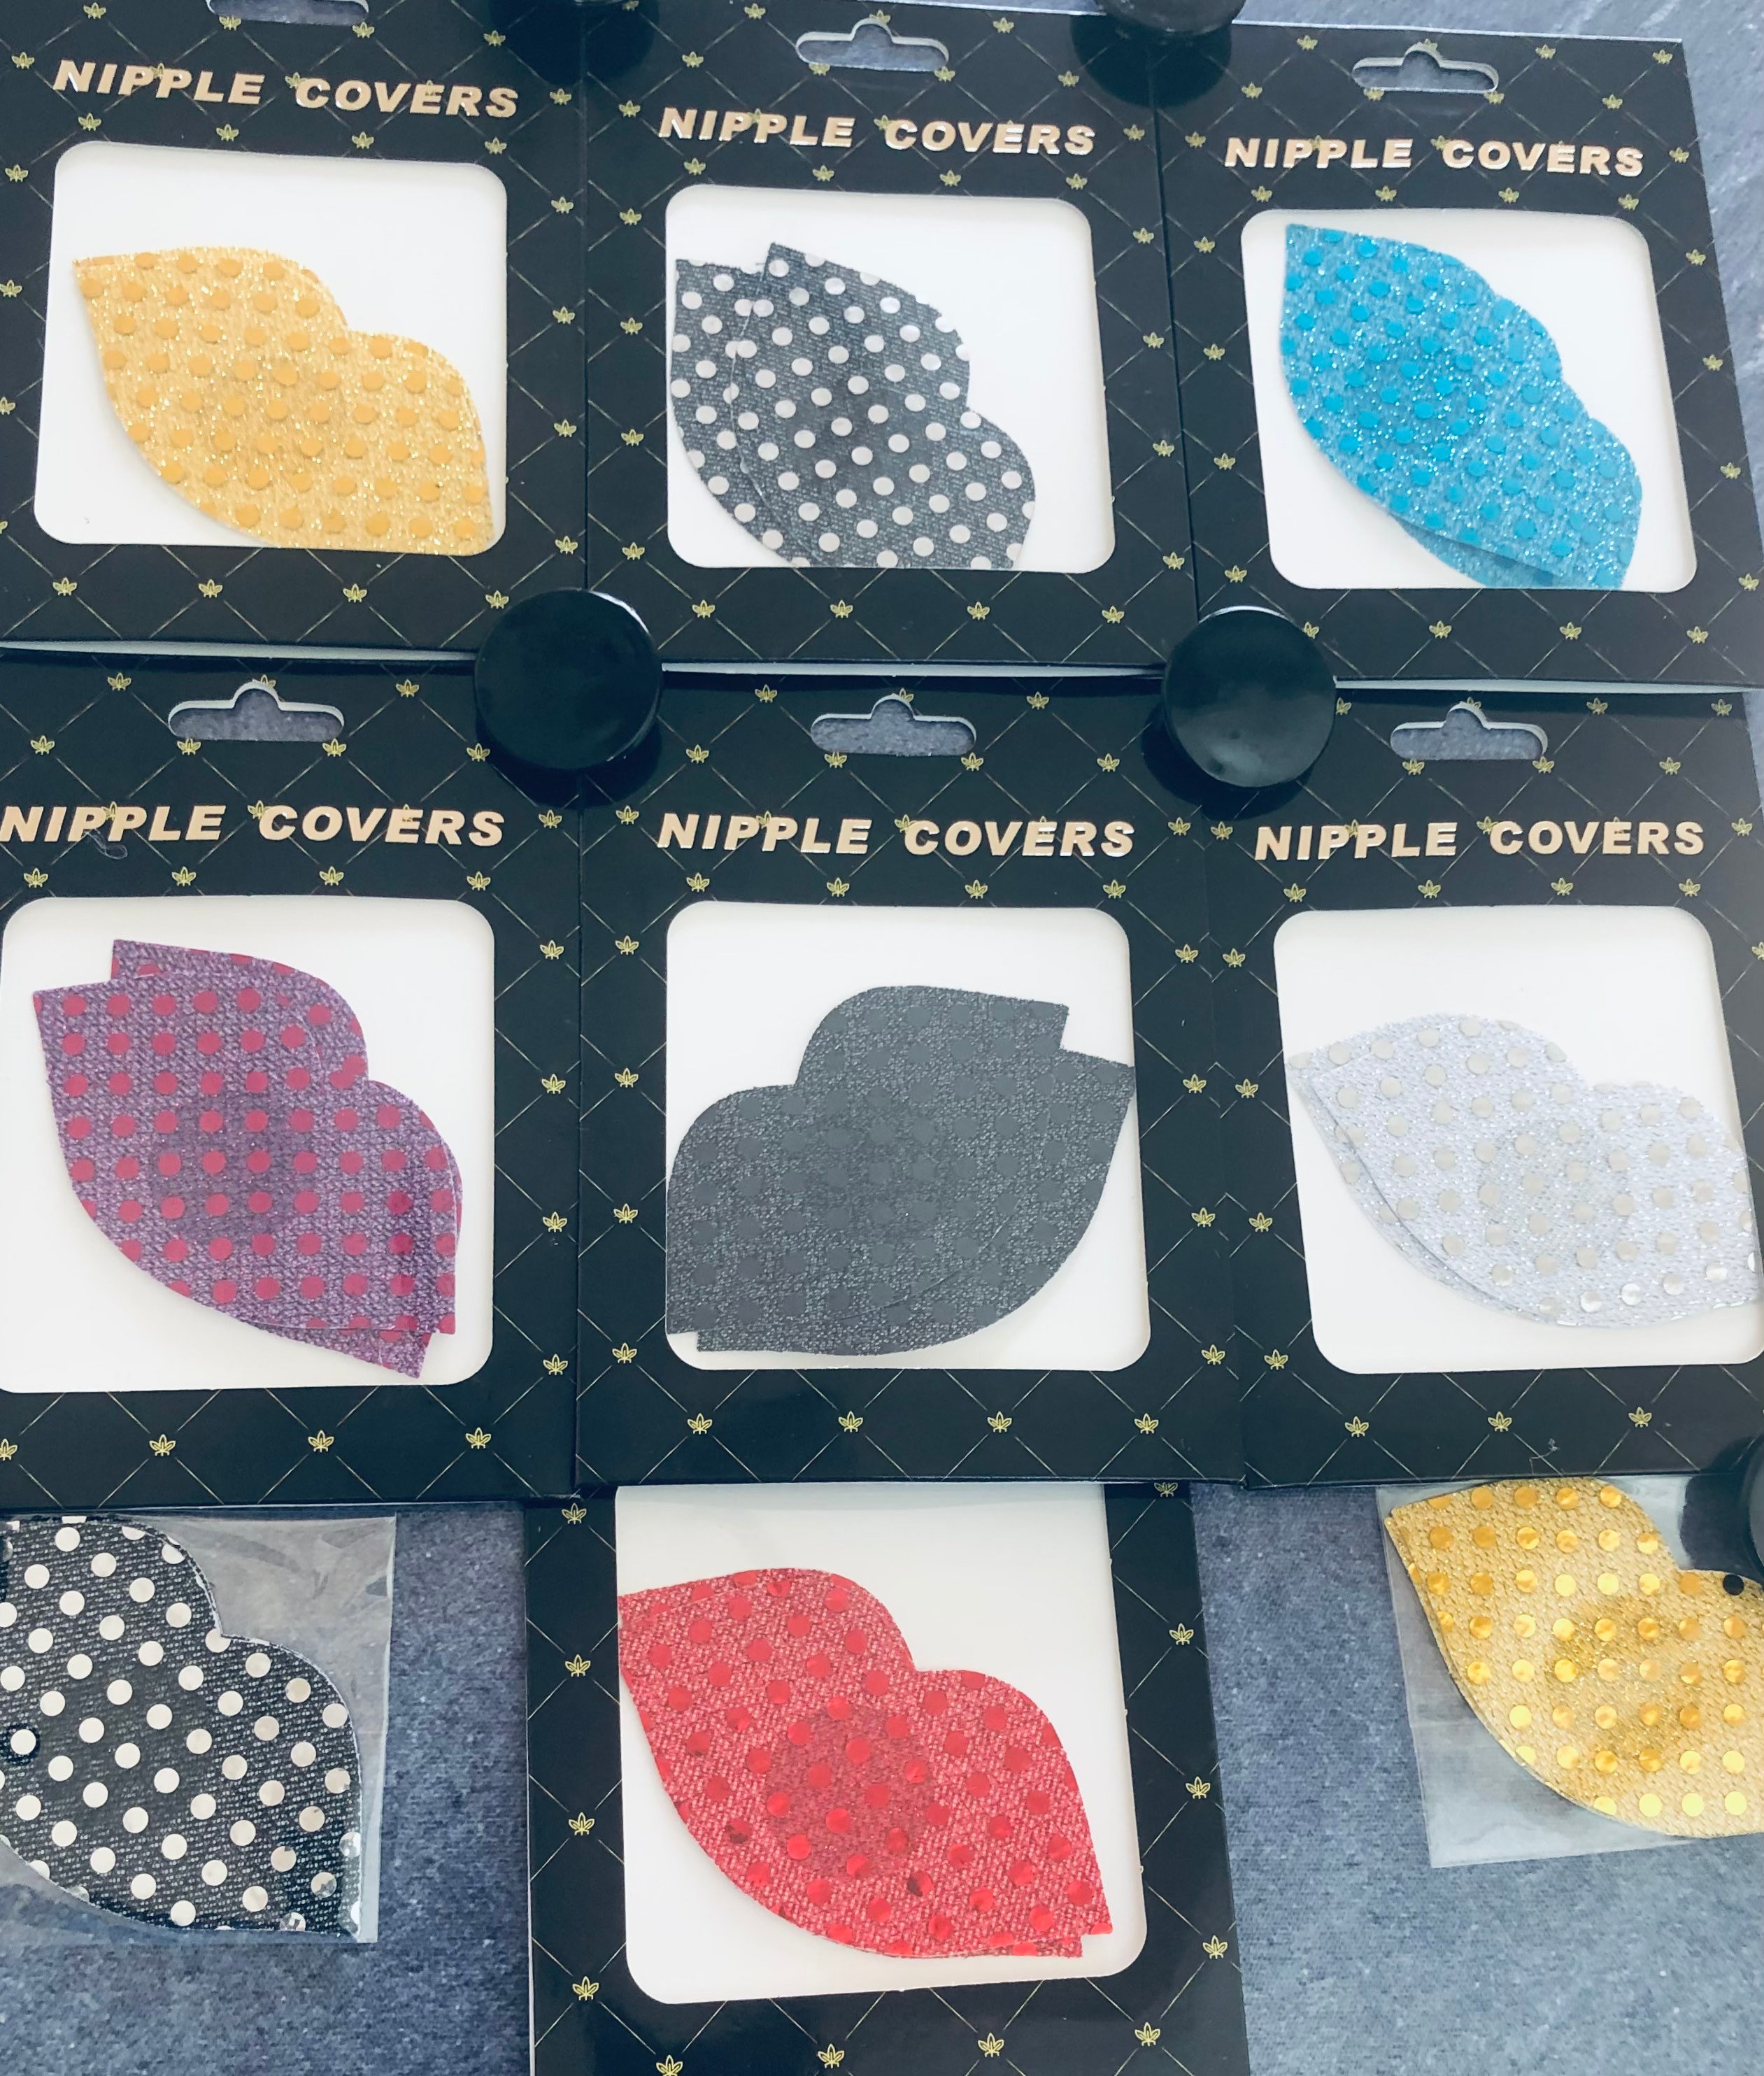 Sexy lips nipple covers designed by Roger Rich 7 hot colors choose